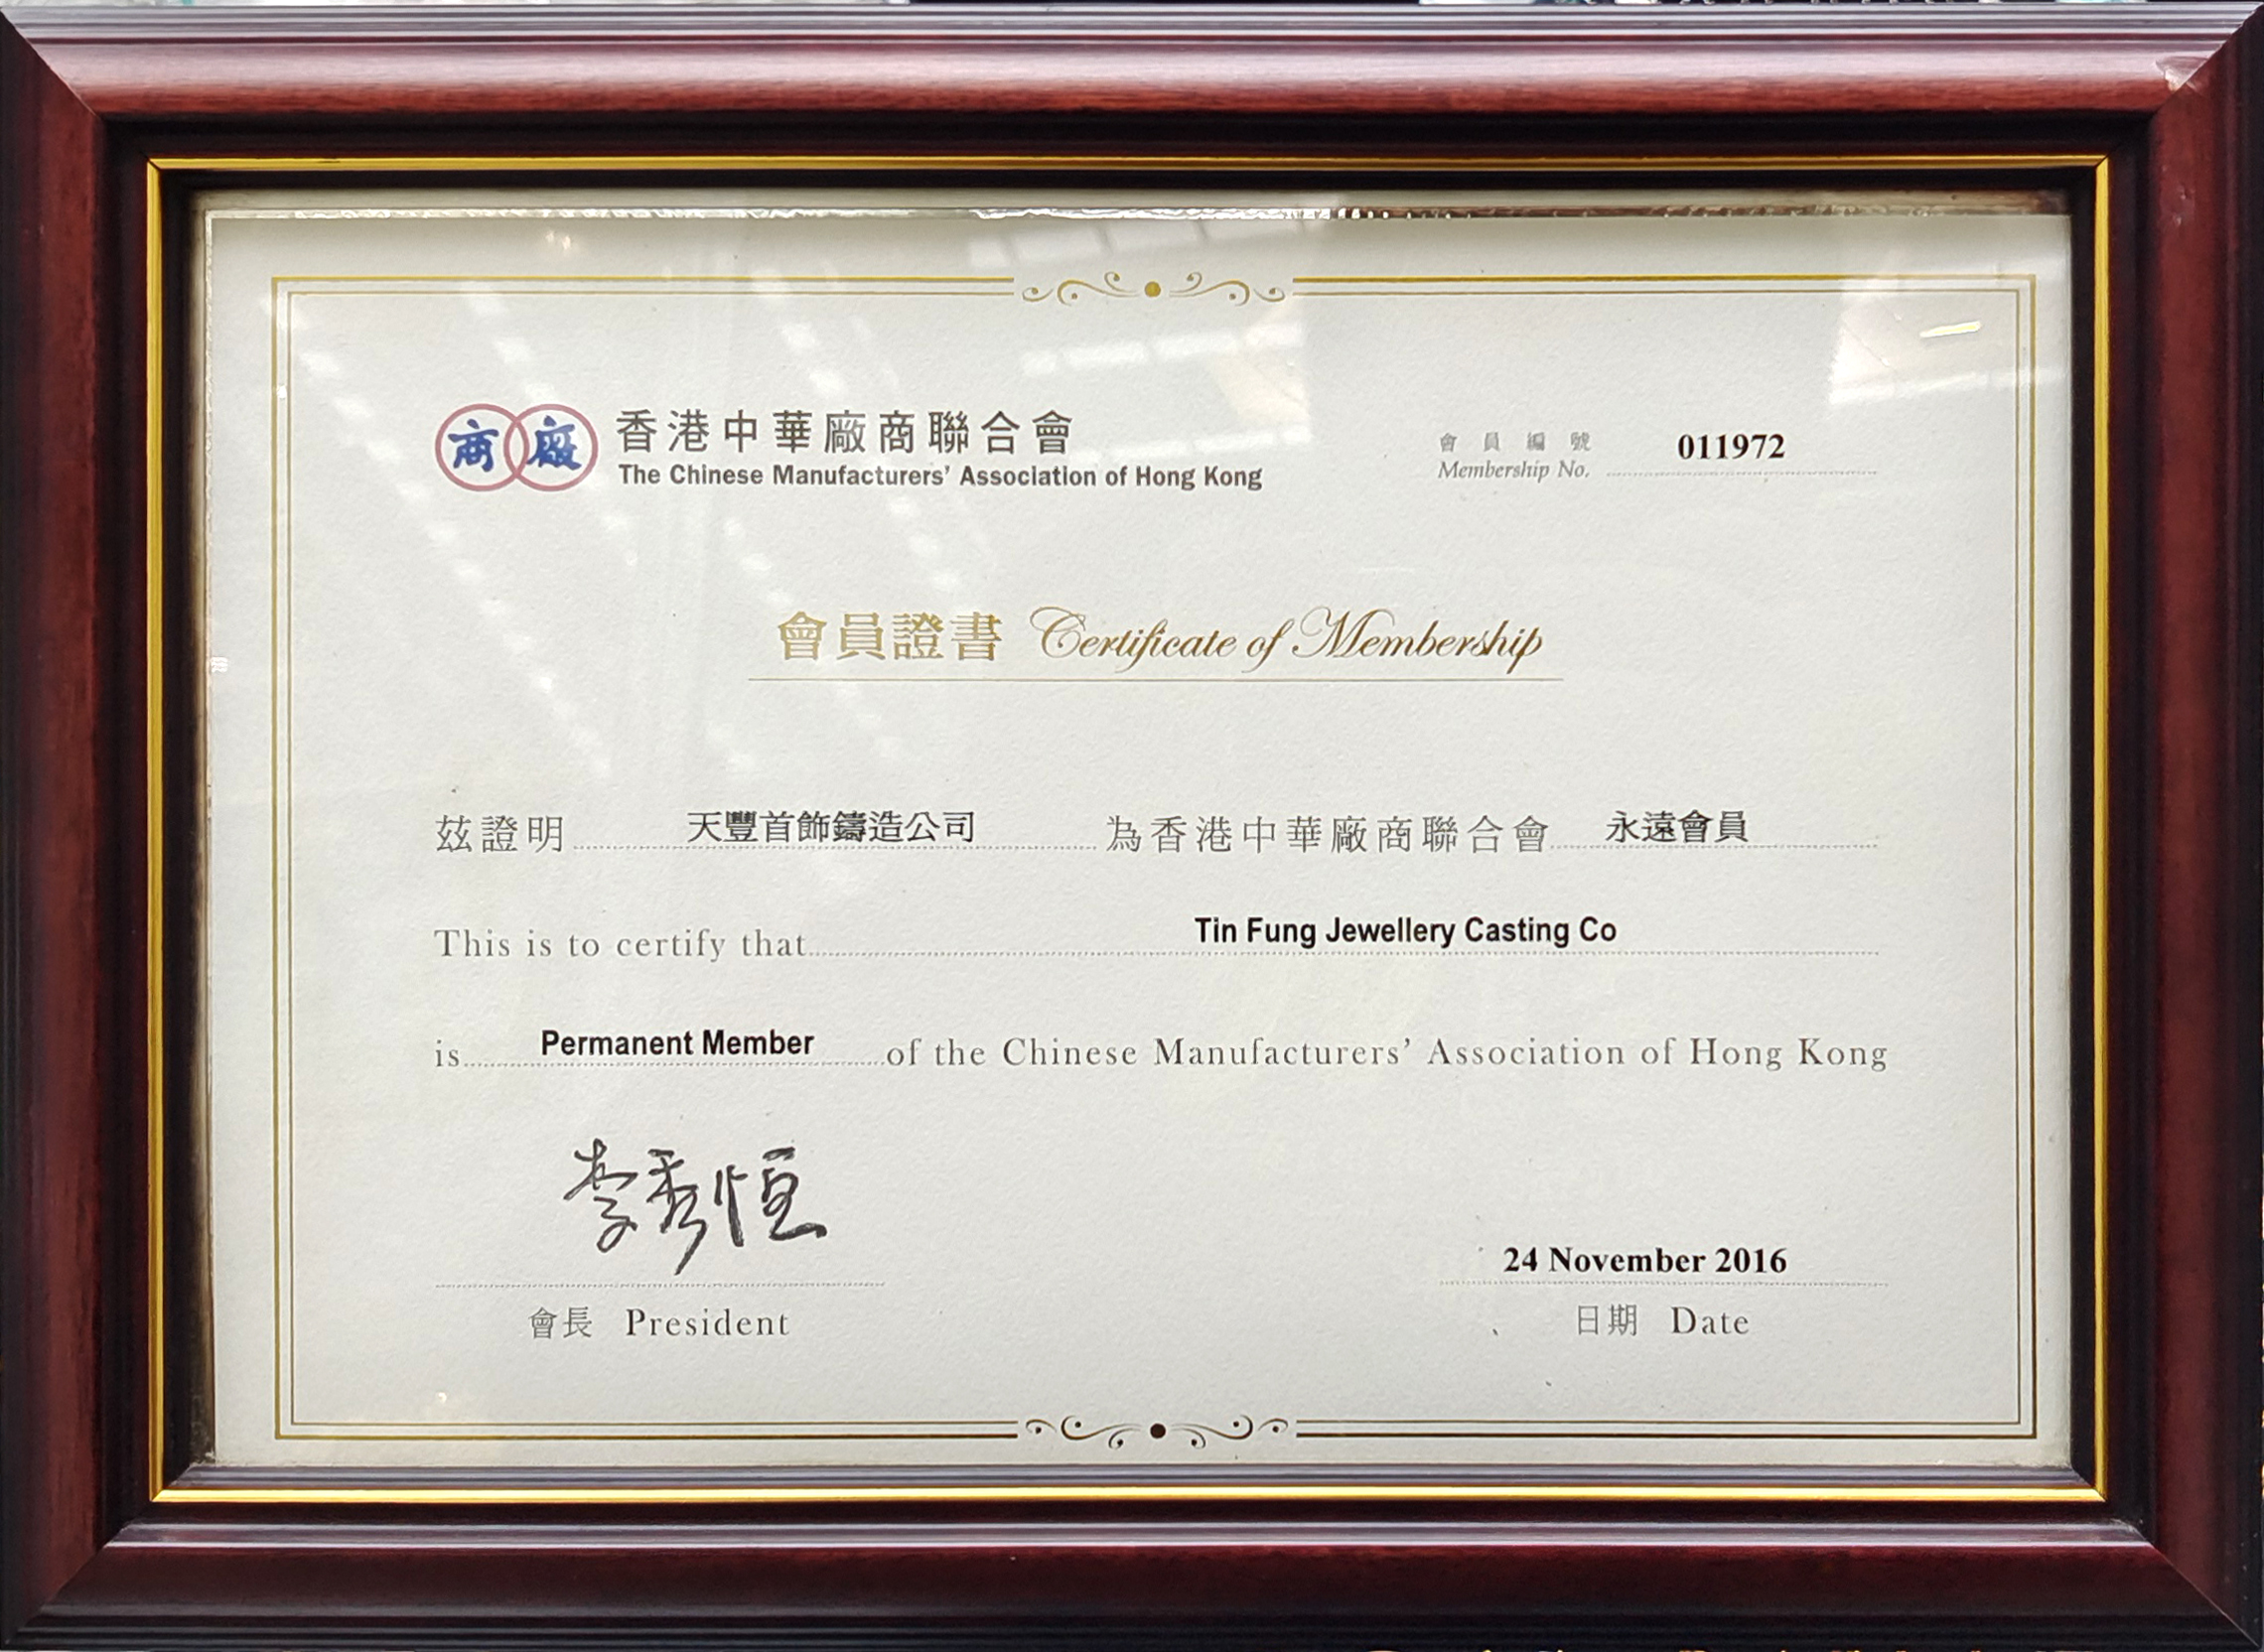 Permanent Member..of the Chinese Manufacturers'Association of Hong Kong